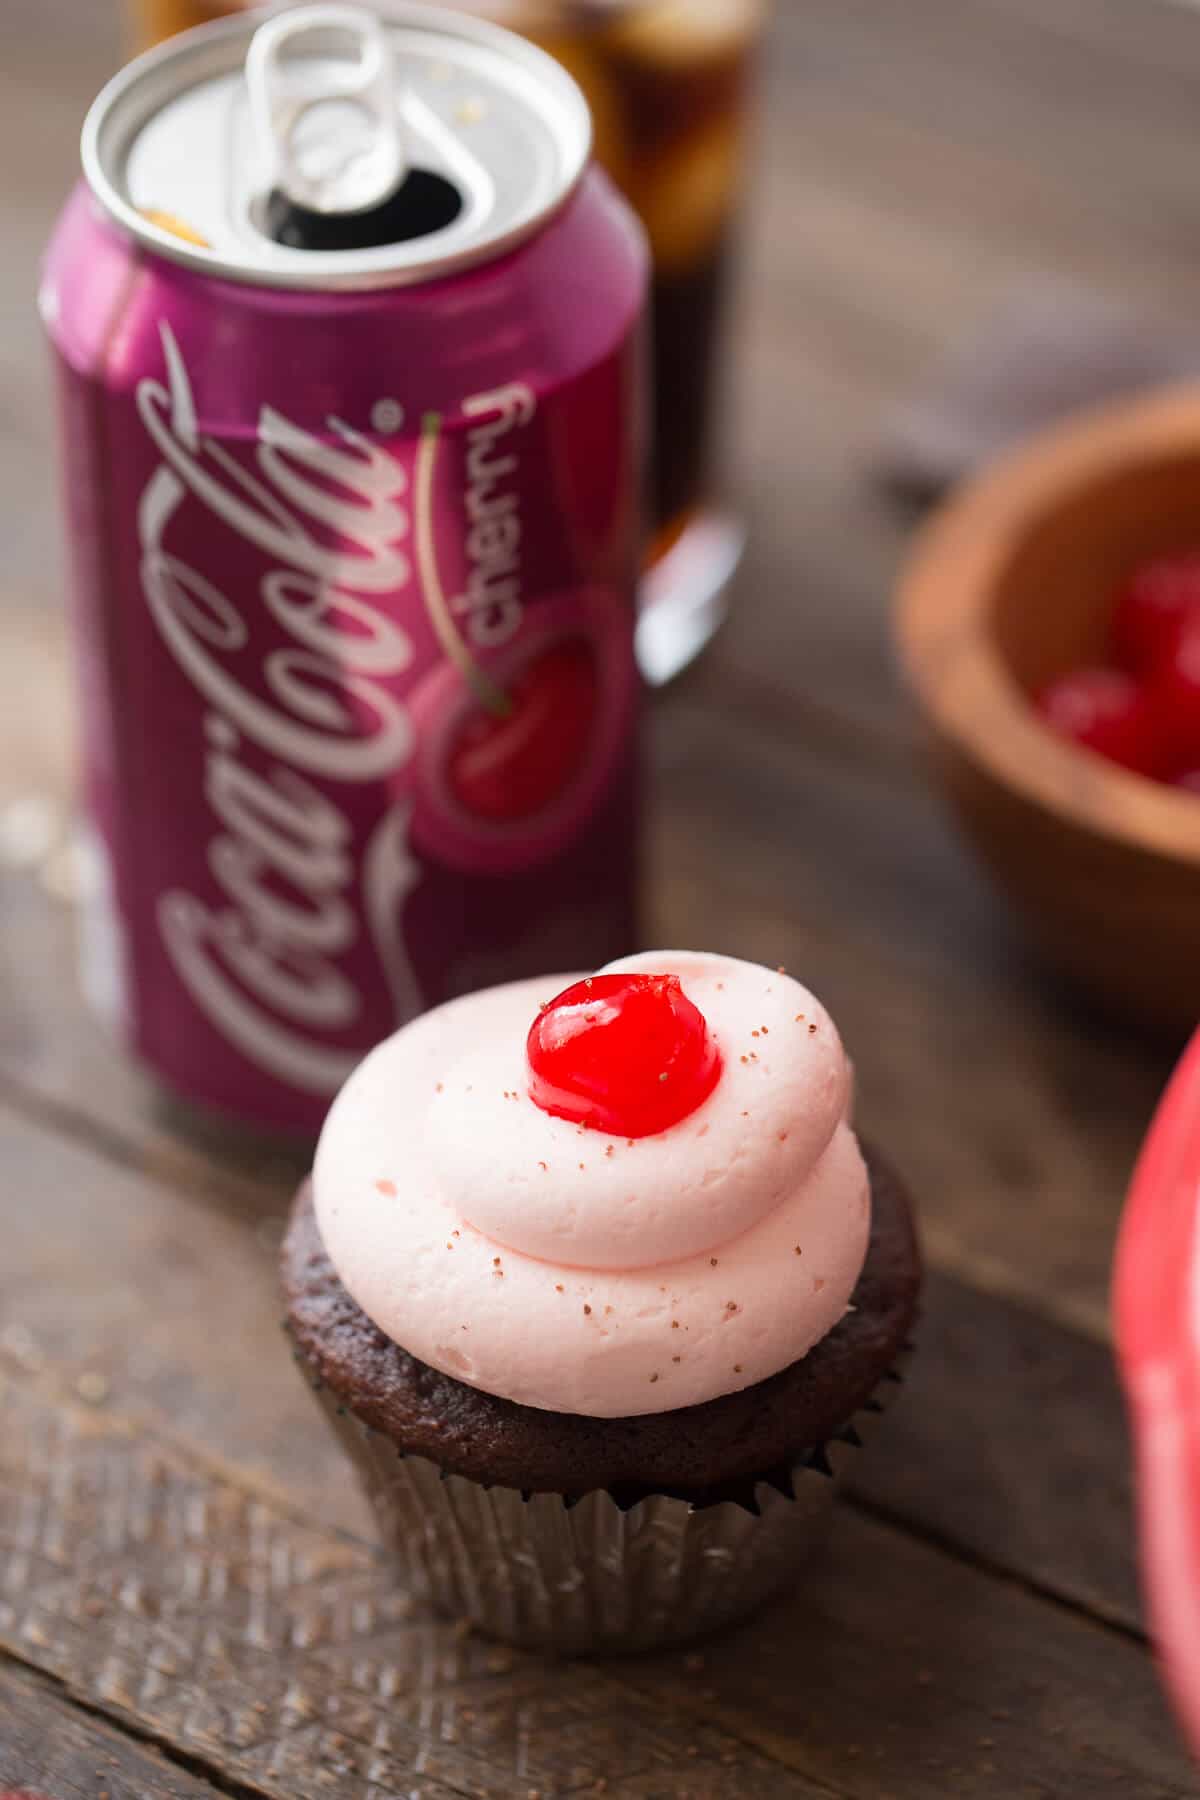 Cherry Coke cupcakes are flirty and fun! The chocolate cupcake is rich and the buttercream is sweet. It is the perfect cupcake!